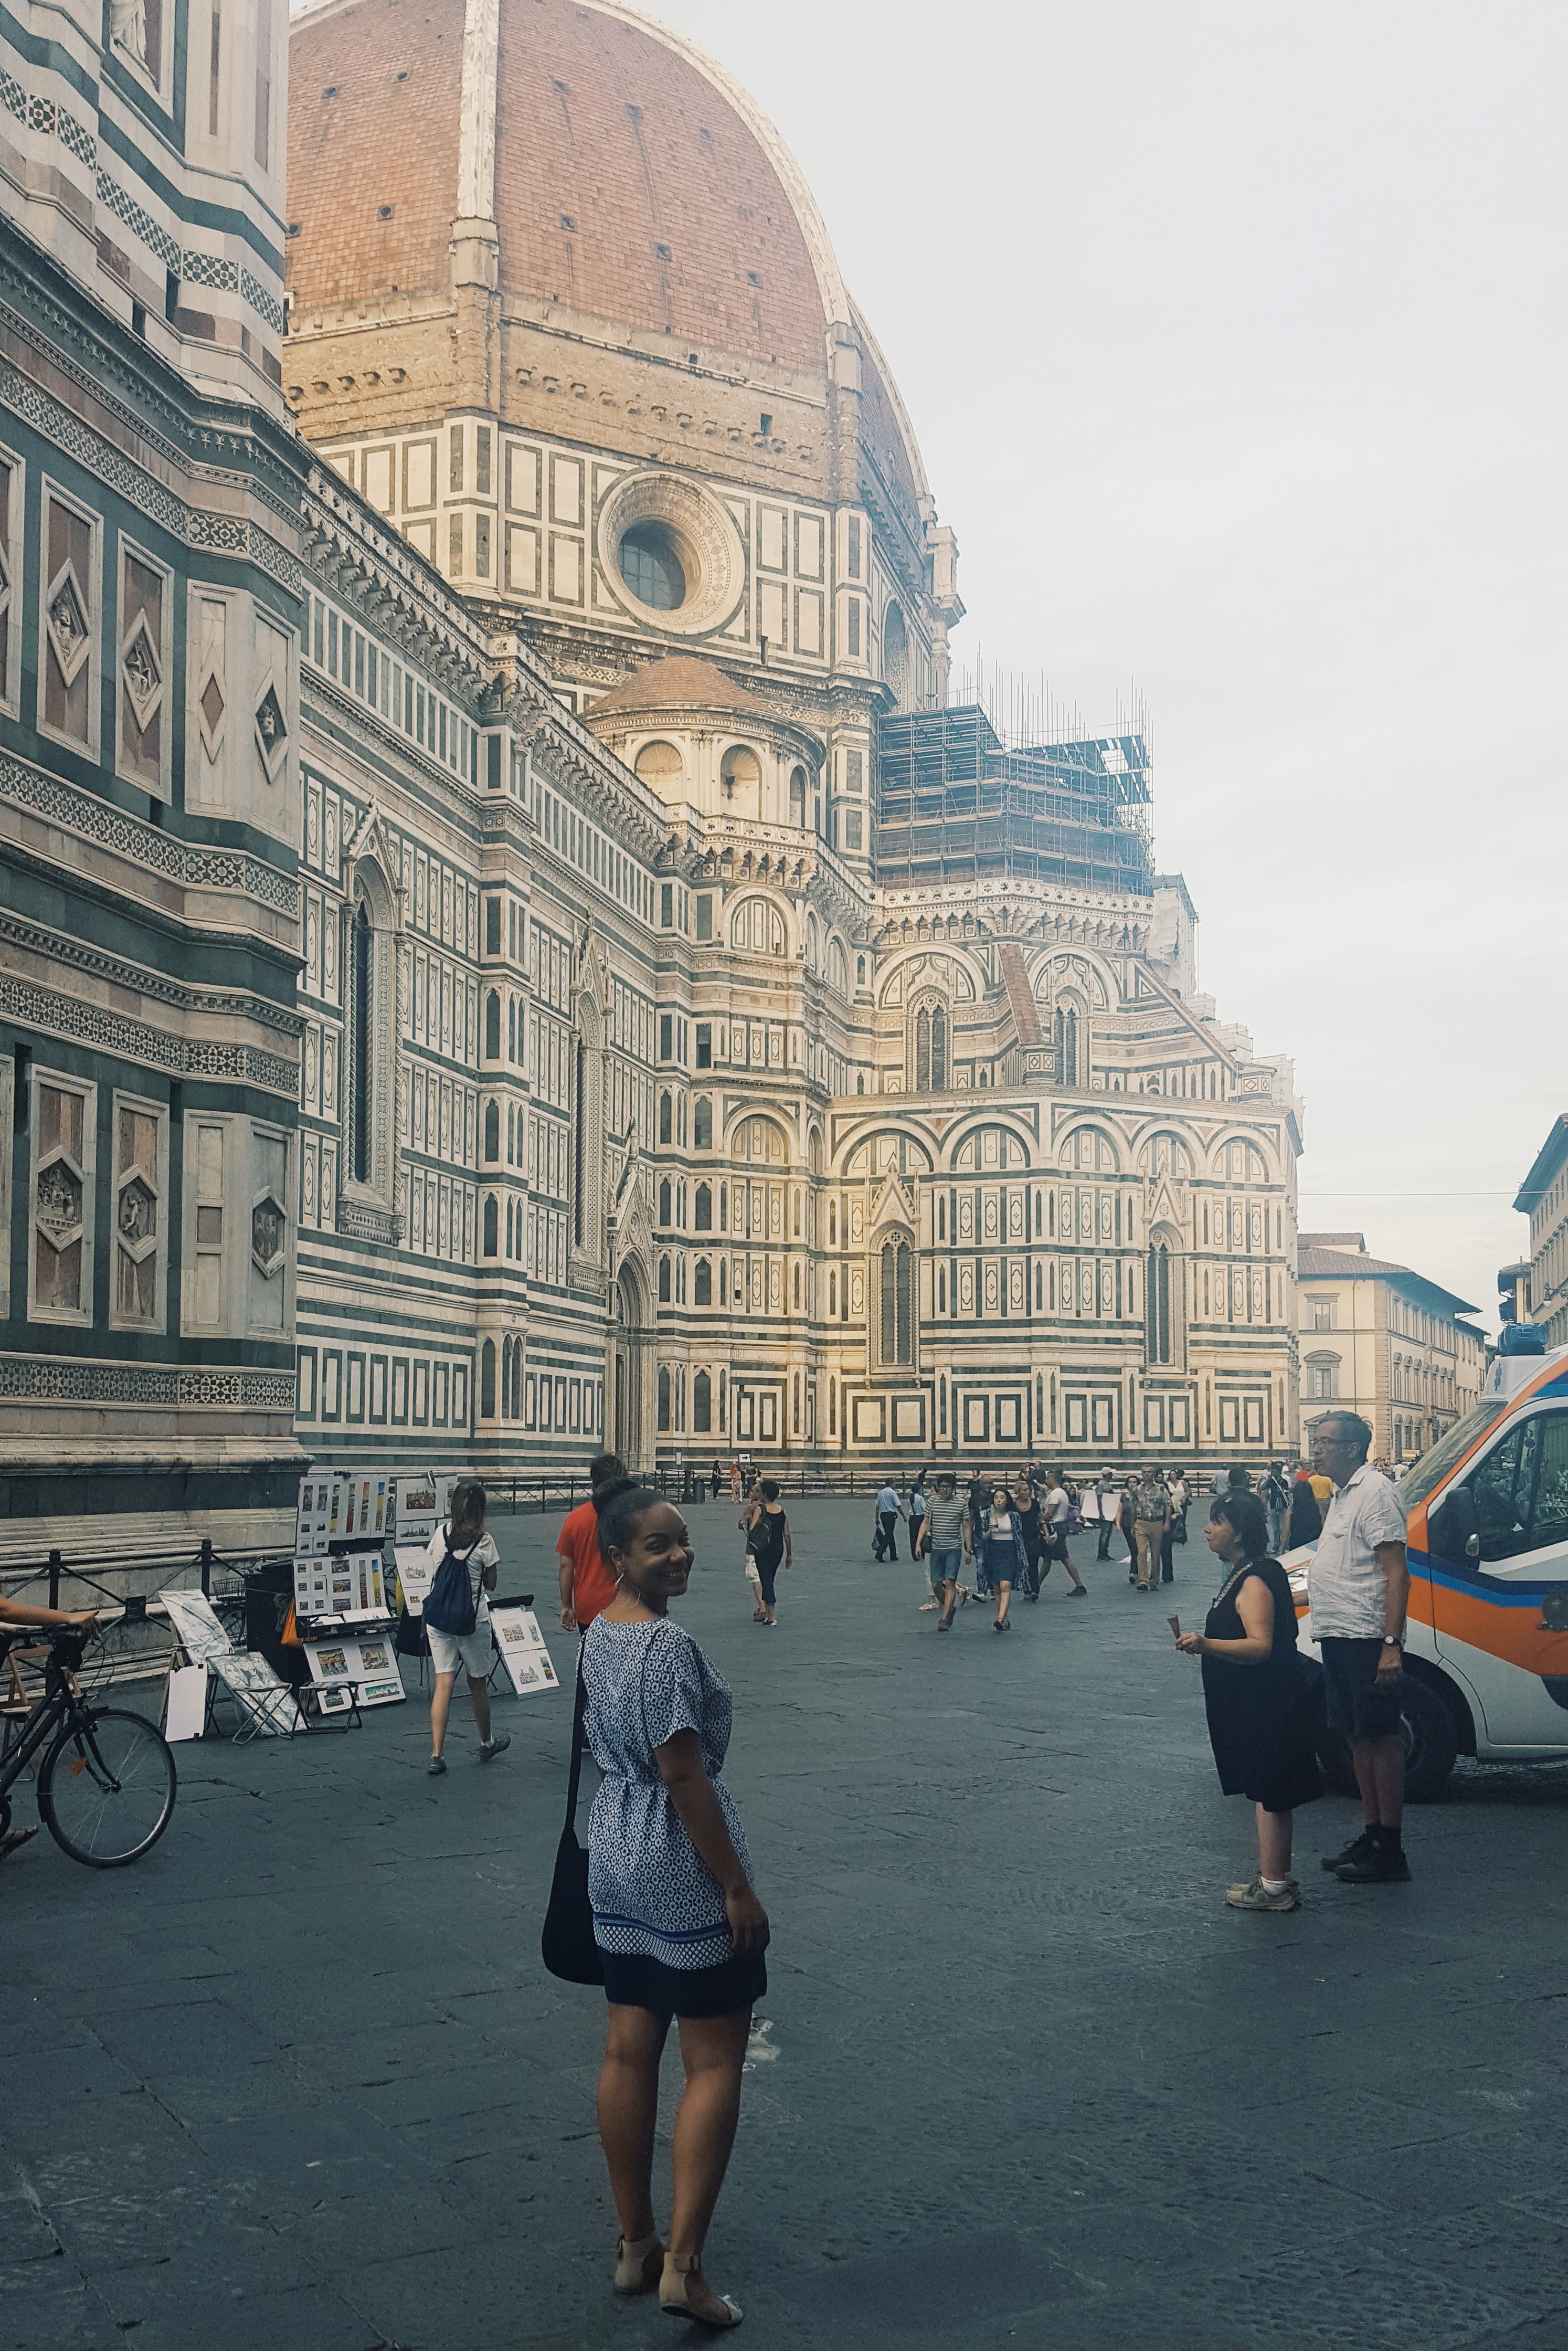 SB Duomo - things to do in Florence